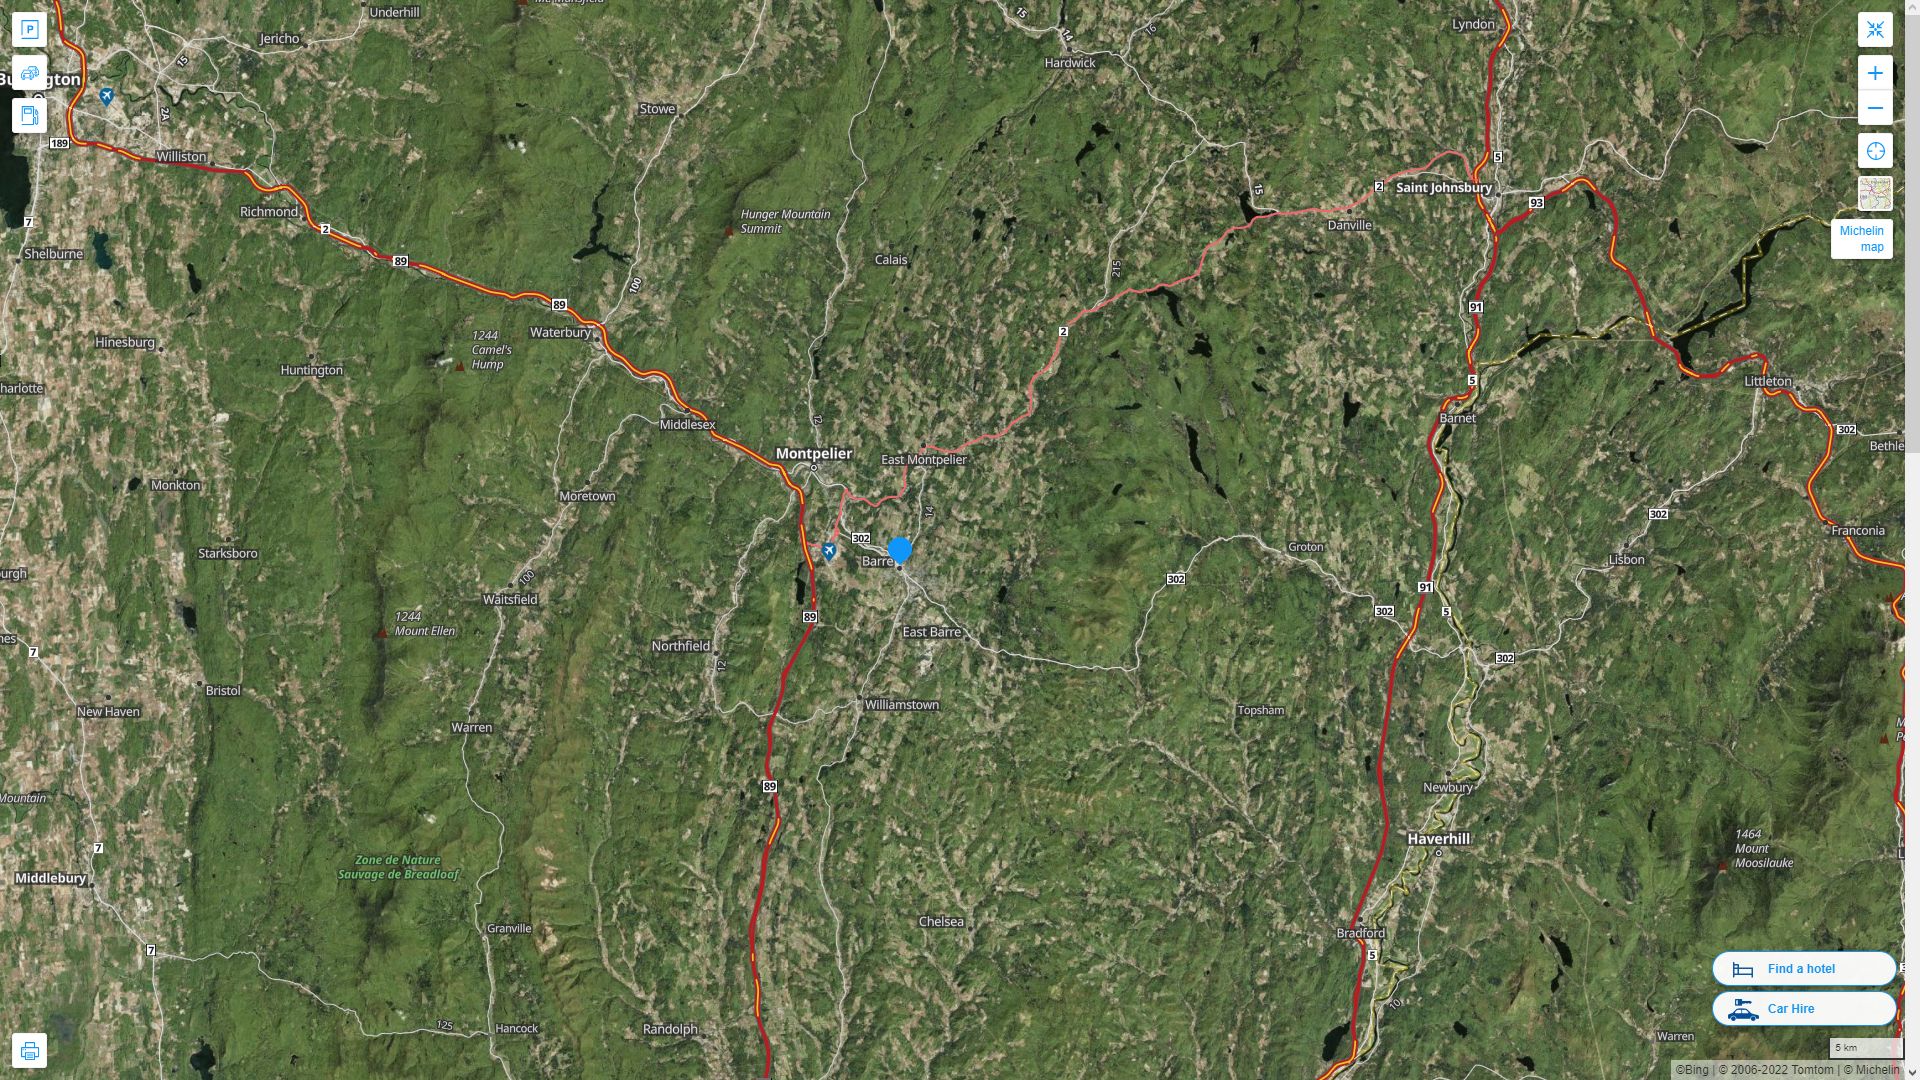 Barre Vermont Highway and Road Map with Satellite View